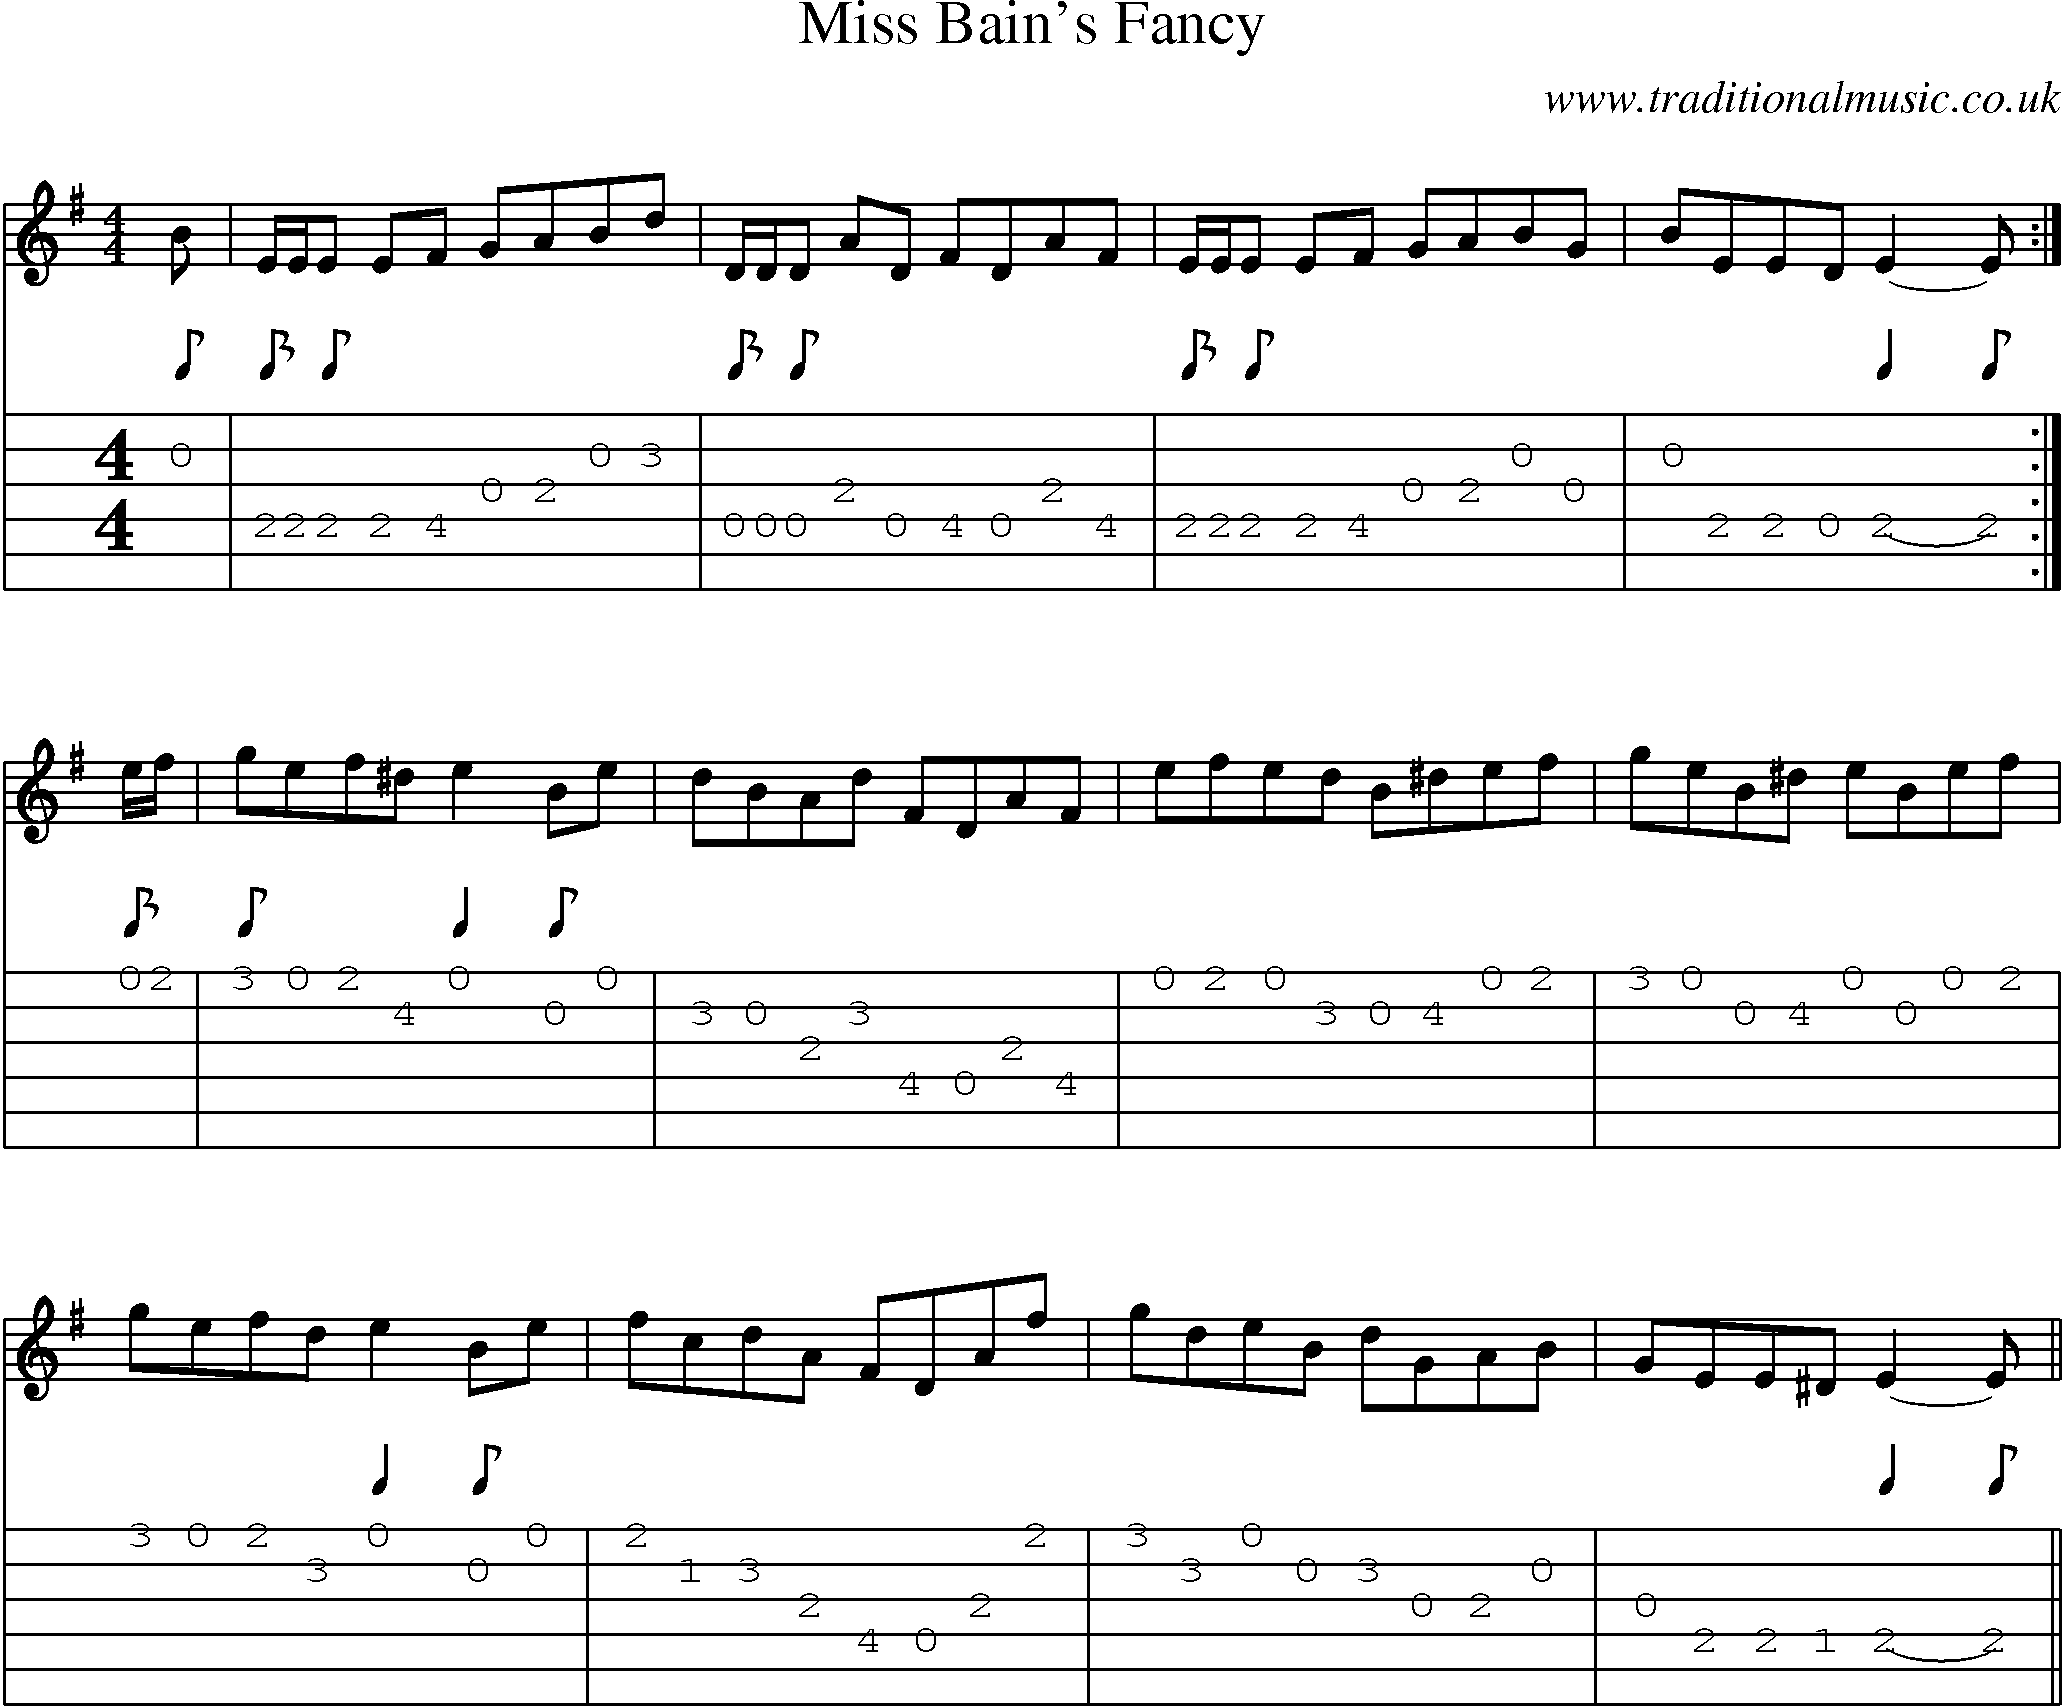 Music Score and Guitar Tabs for Miss Bains Fancy